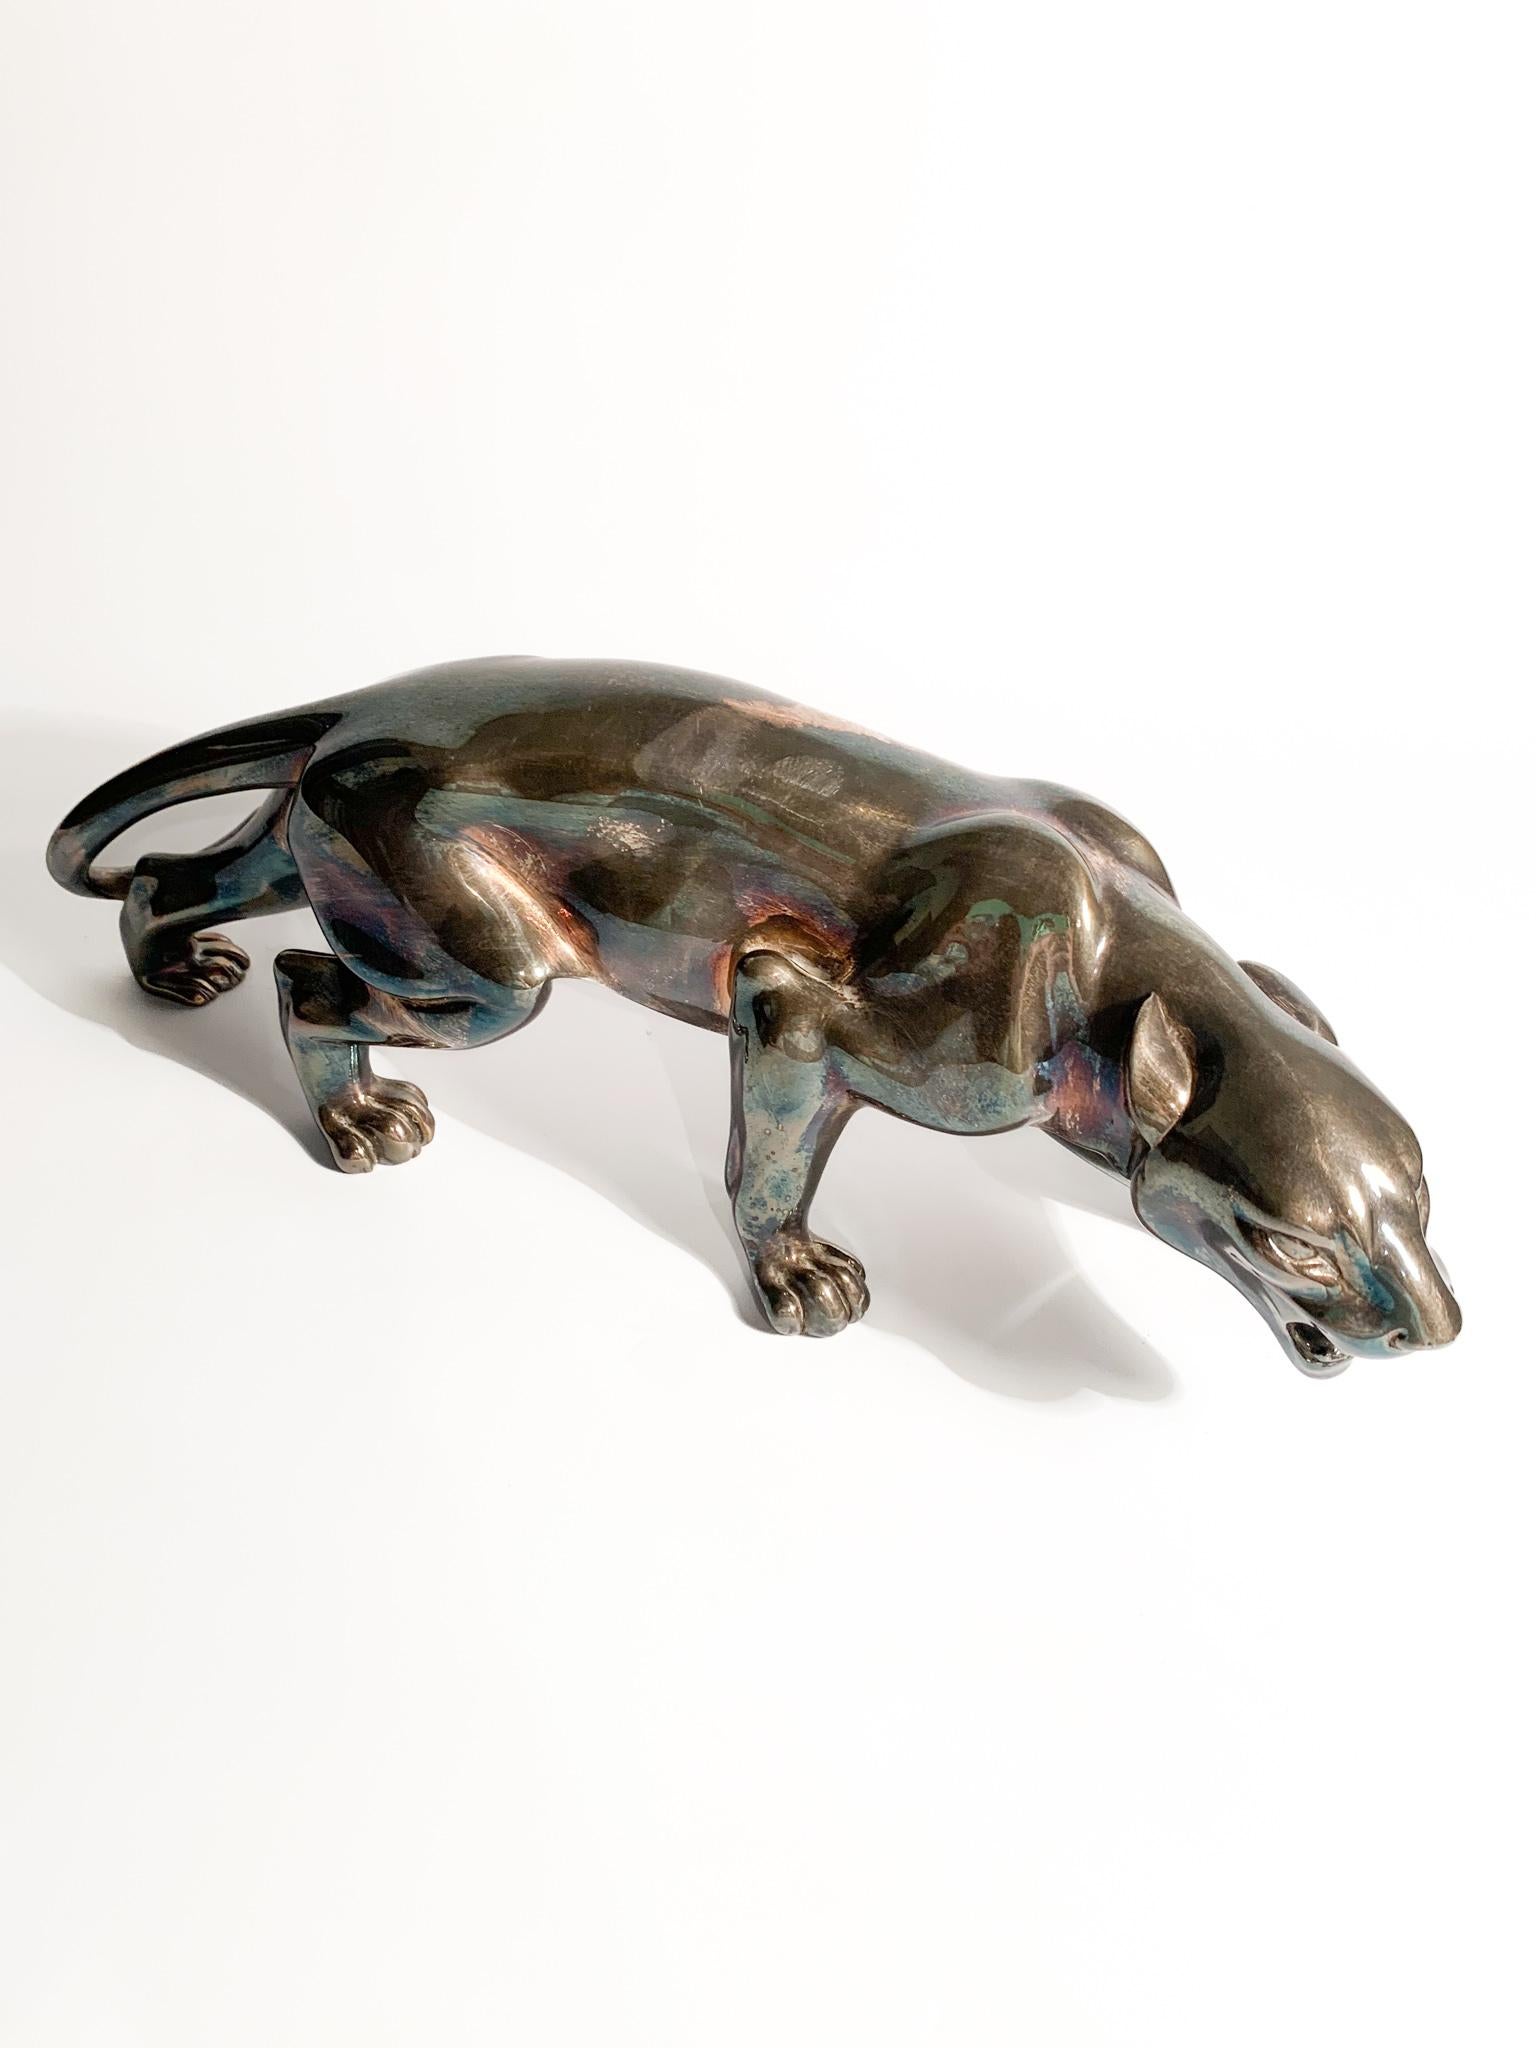 Deco panther sculpture made in France with silver casting in the 1930s

Ø 36 cm Ø 10 cm h 13 cm